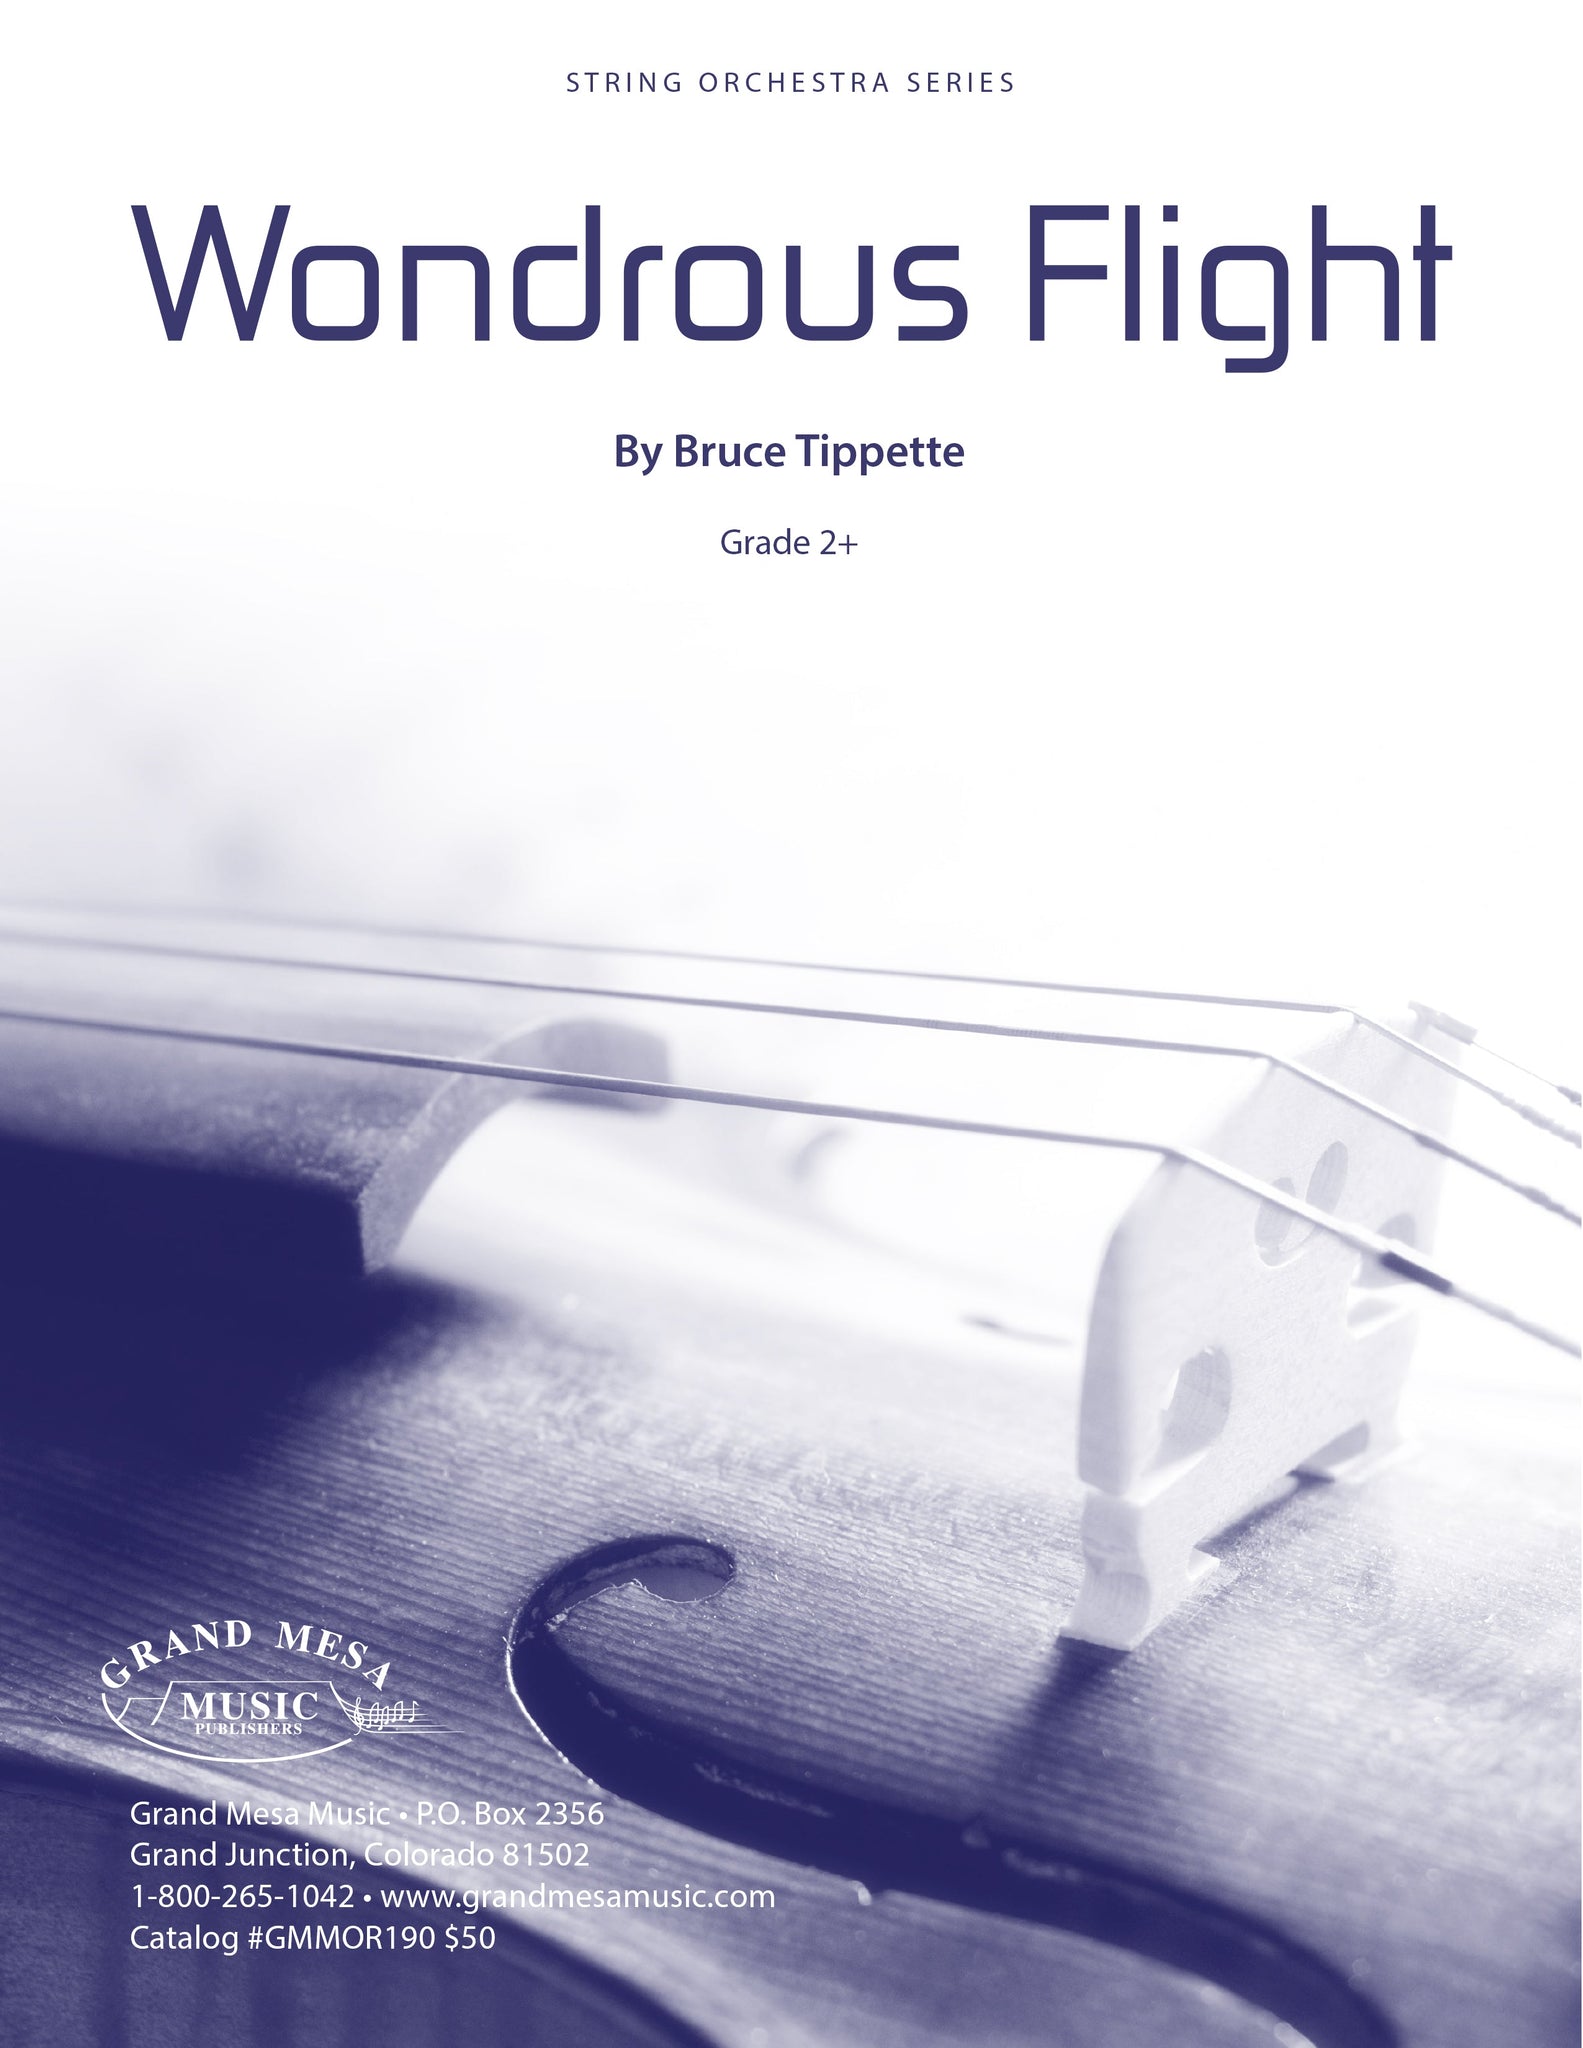 Strings sheet music cover of Wondrous Flight, composed by Bruce Tippette.